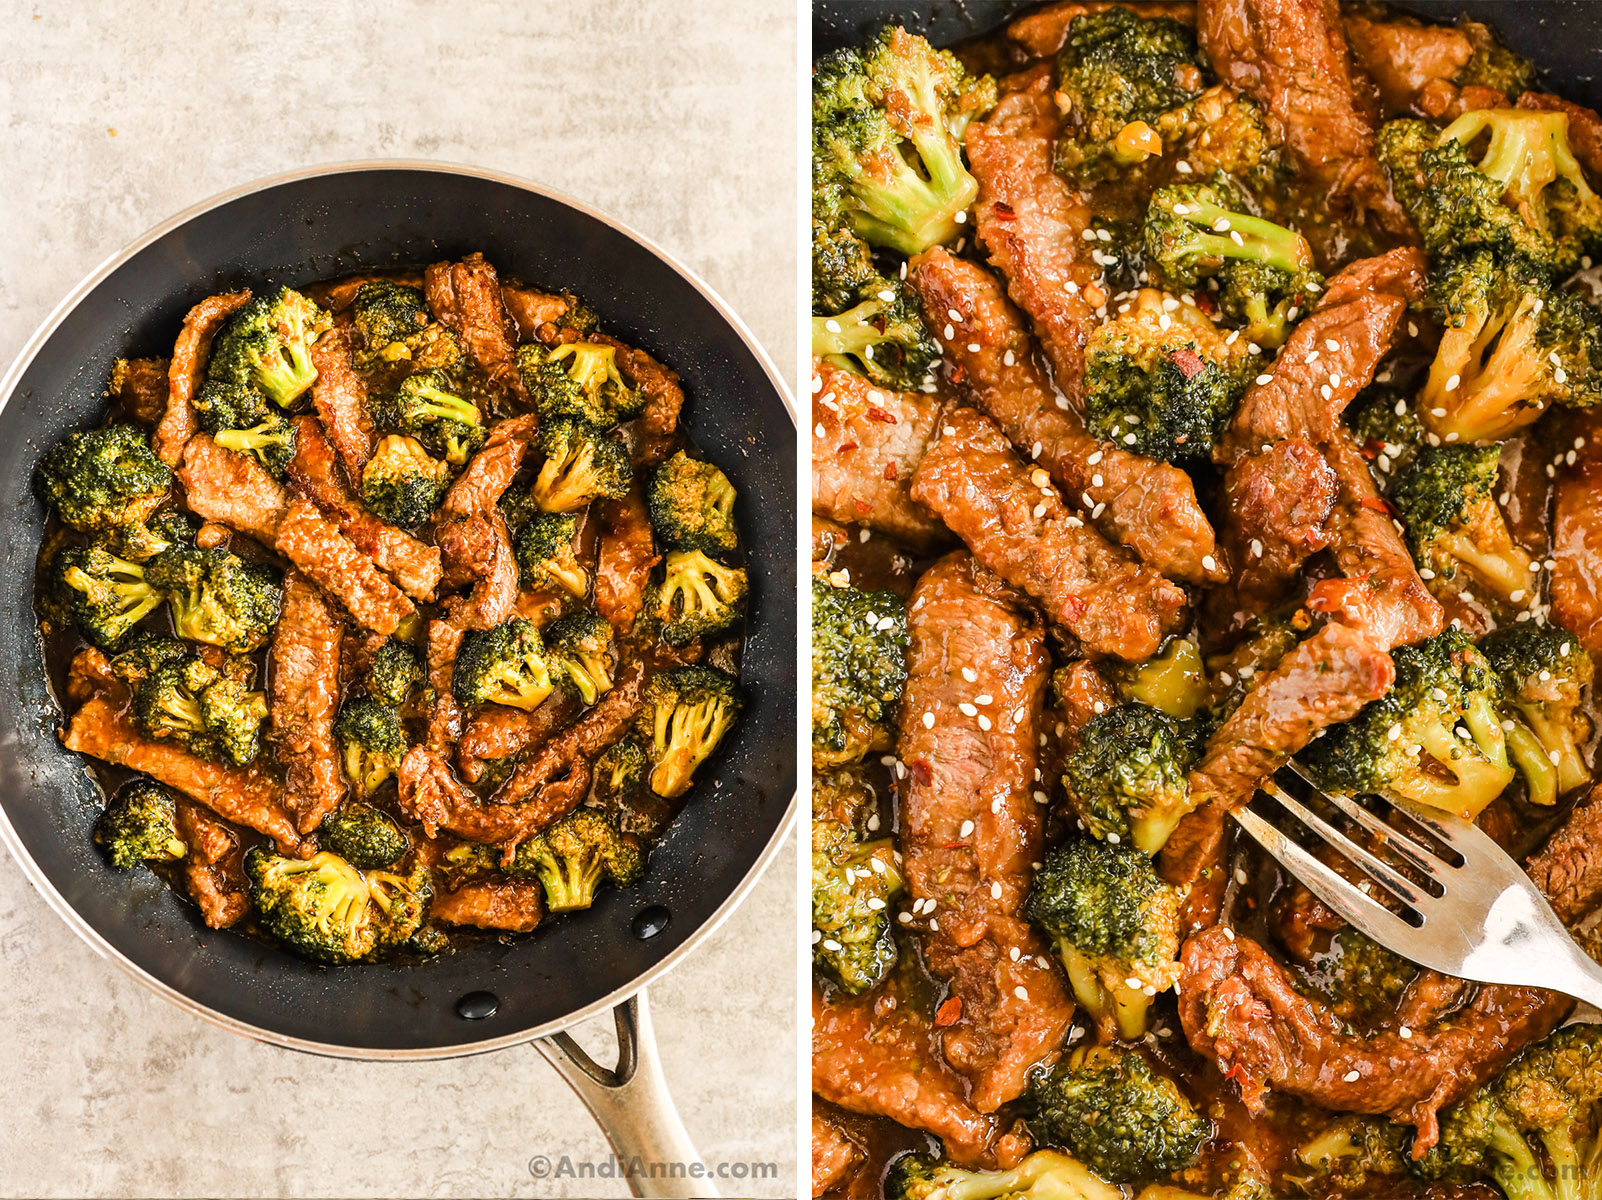 Beef and broccoli recipe in a frying pan 